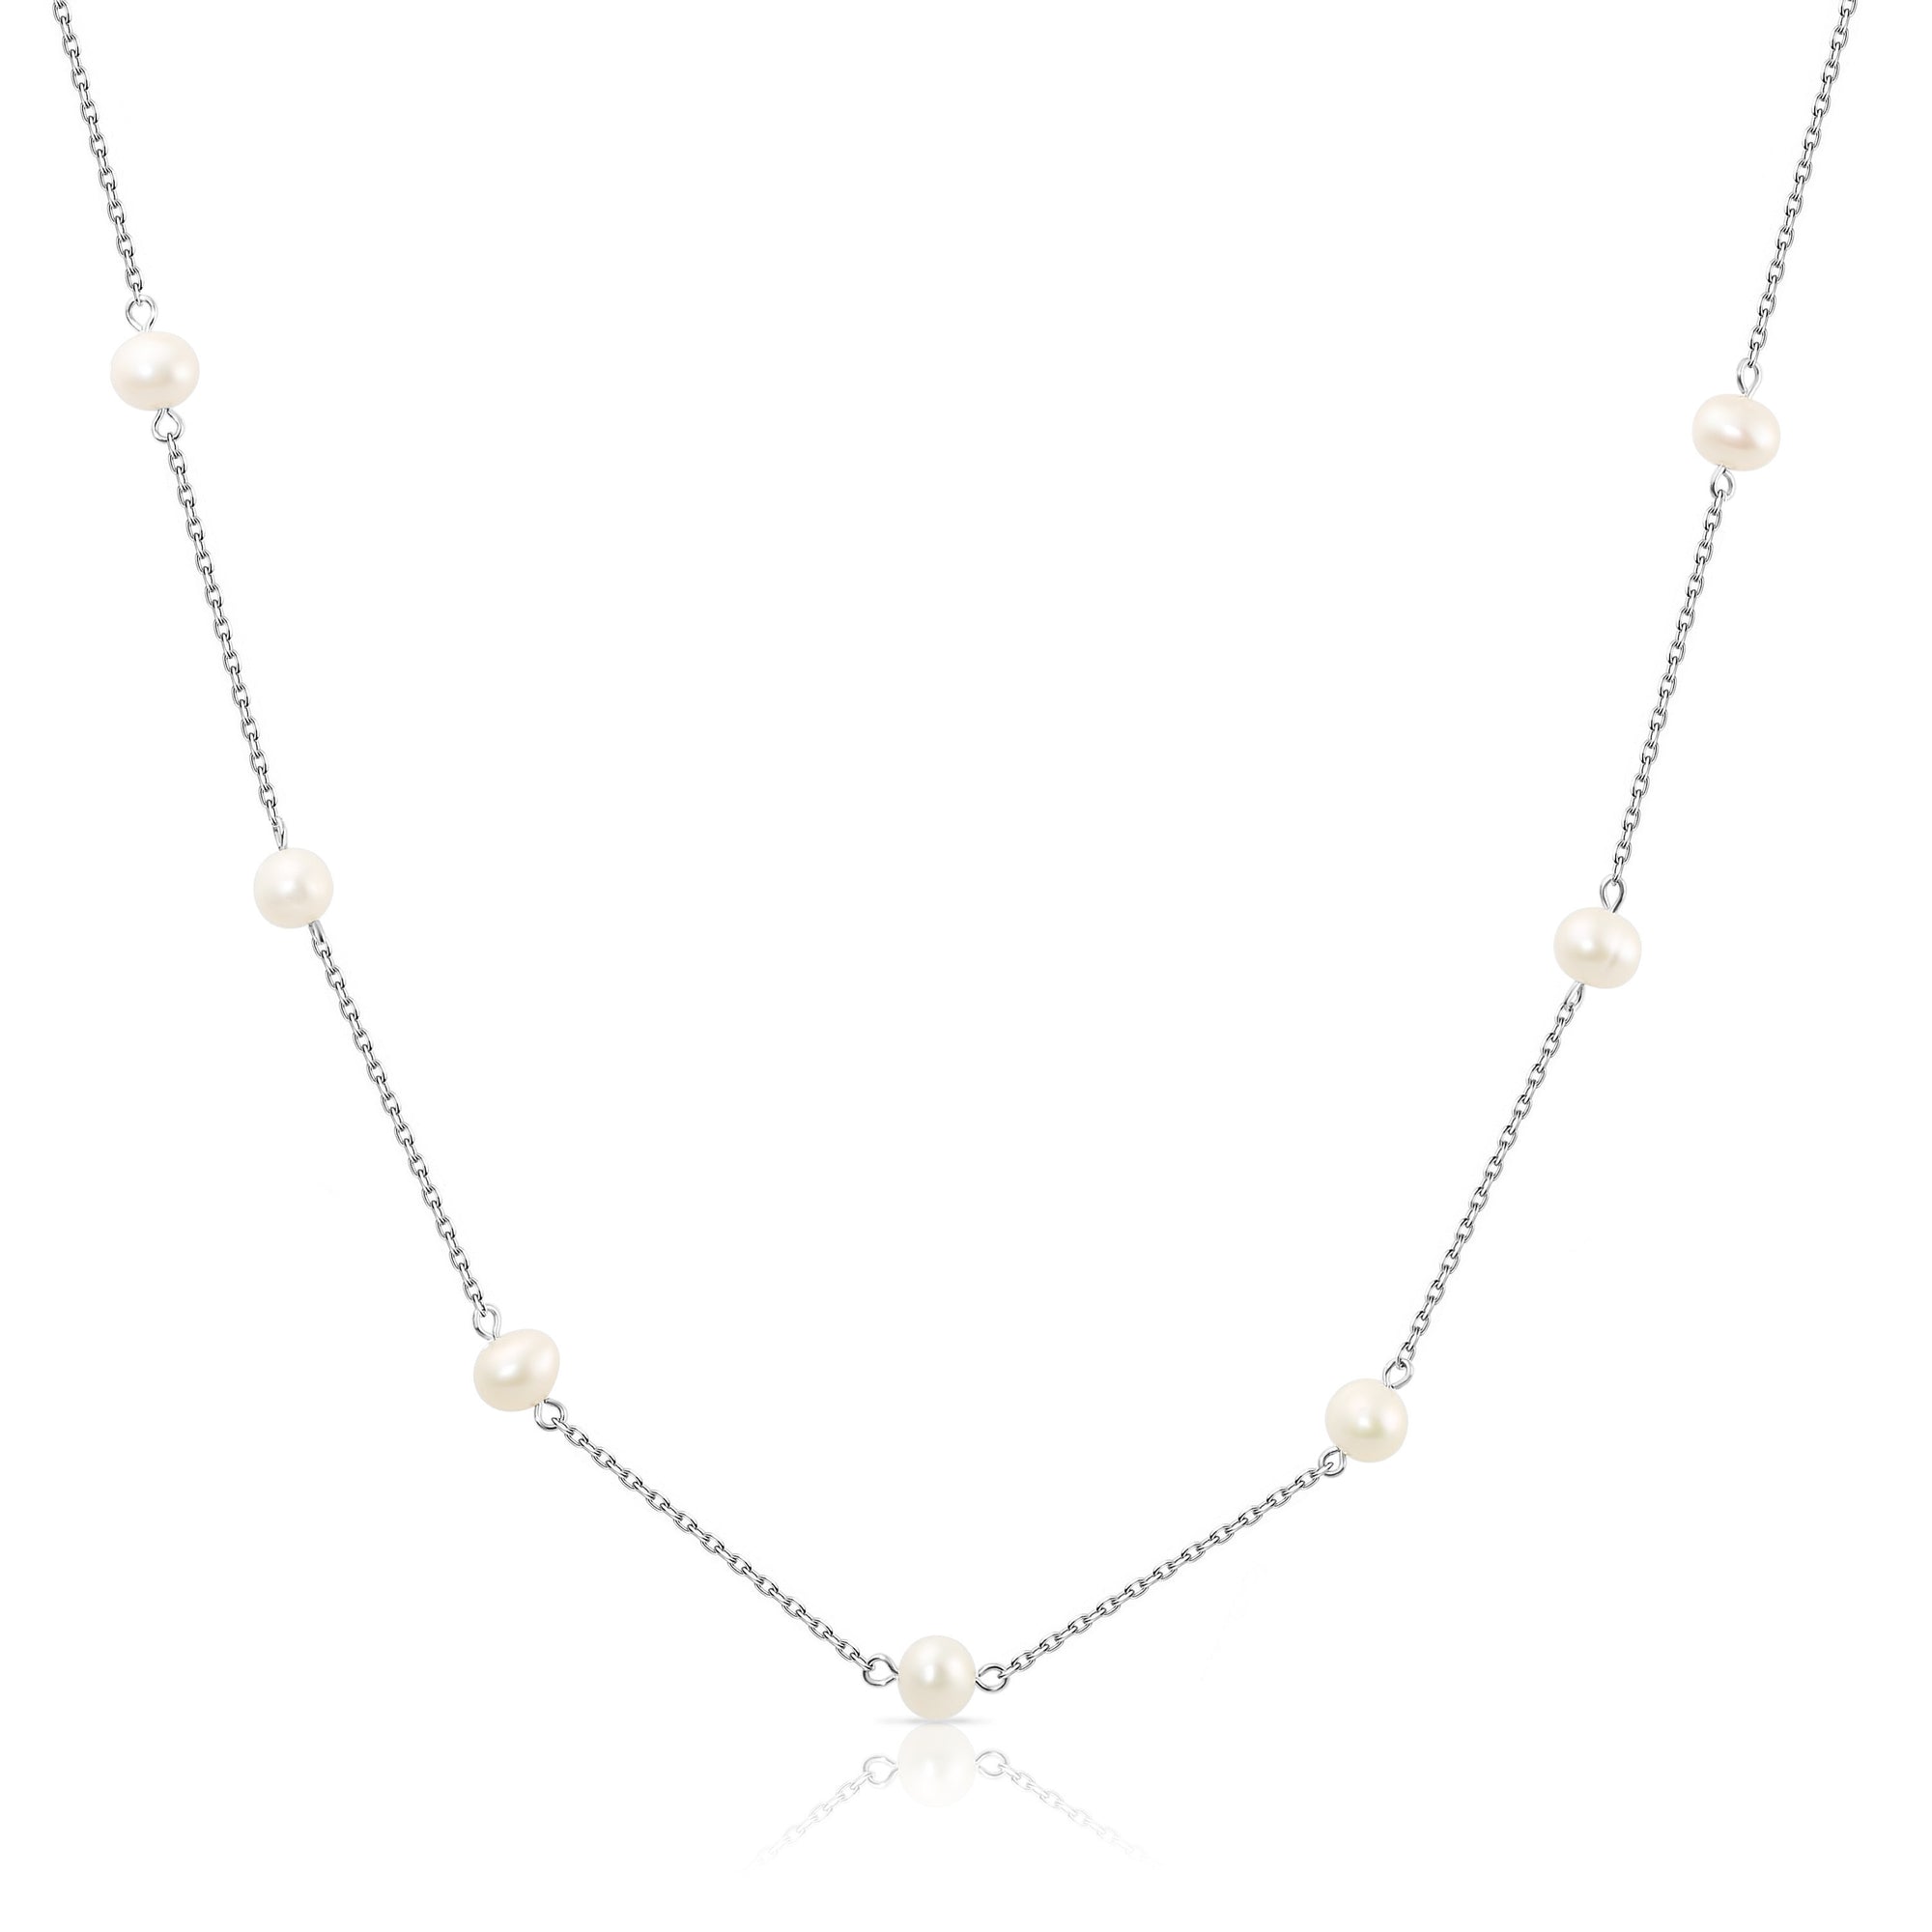 Pearl Station Necklace, Freshwater Cultured Pearl, 3 Lengths in Sterling Silver